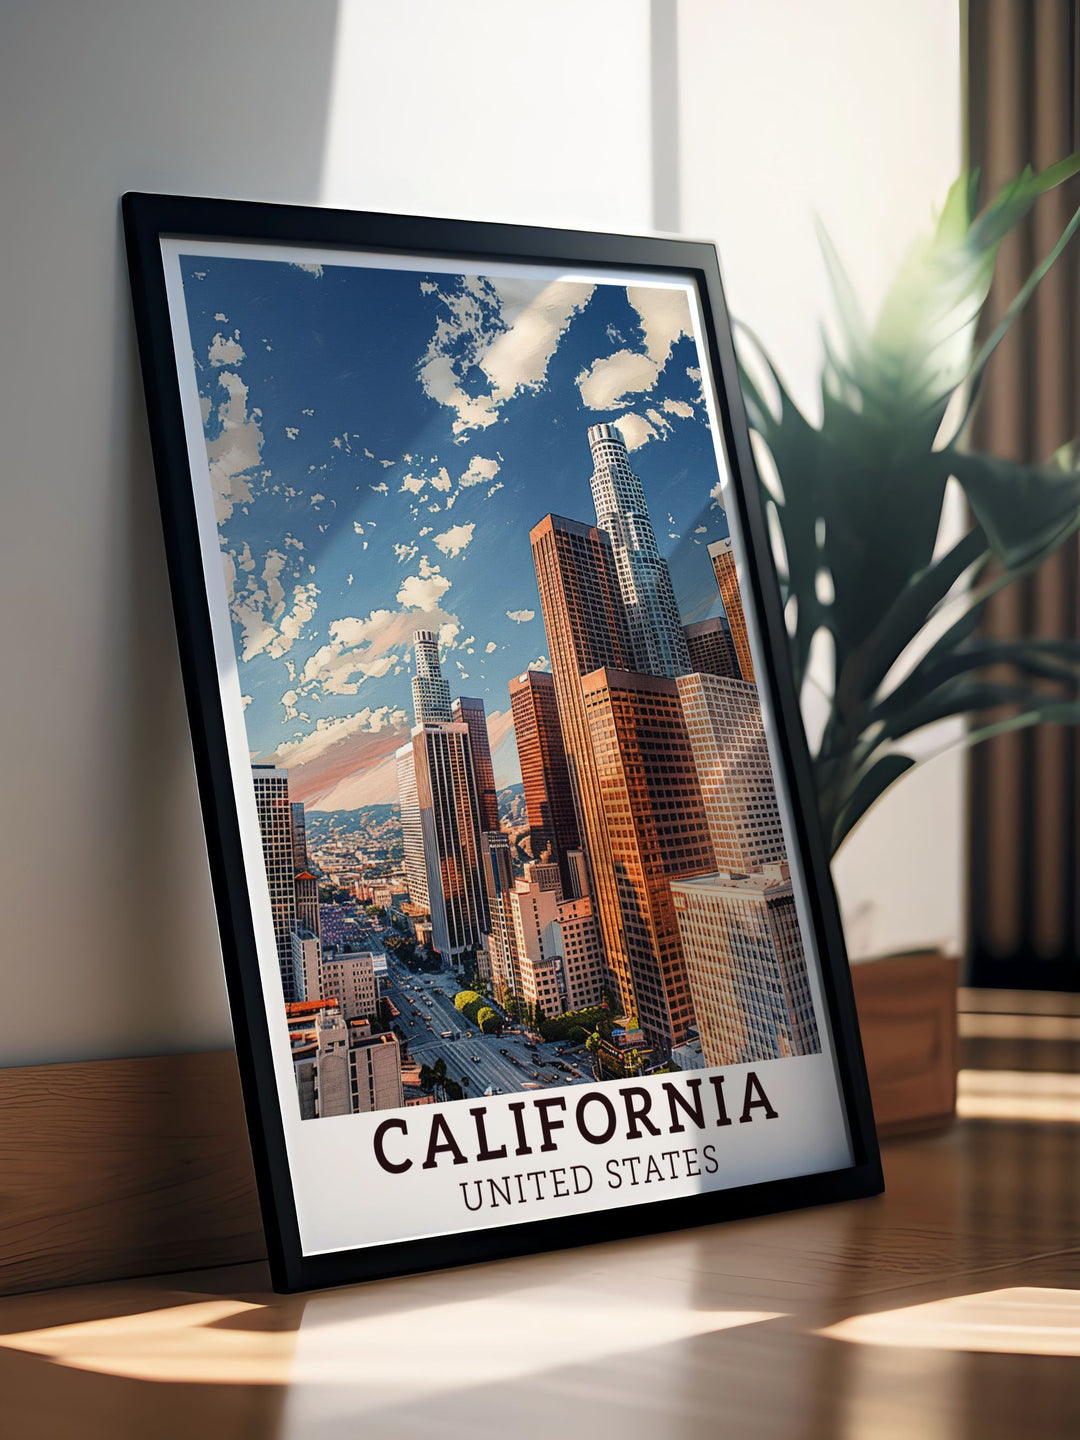 California travel wall art featuring Los Angeles a captivating poster that brings the spirit of Californias most famous city into your home perfect for modern or vintage decor styles adds sophistication and elegance to any space